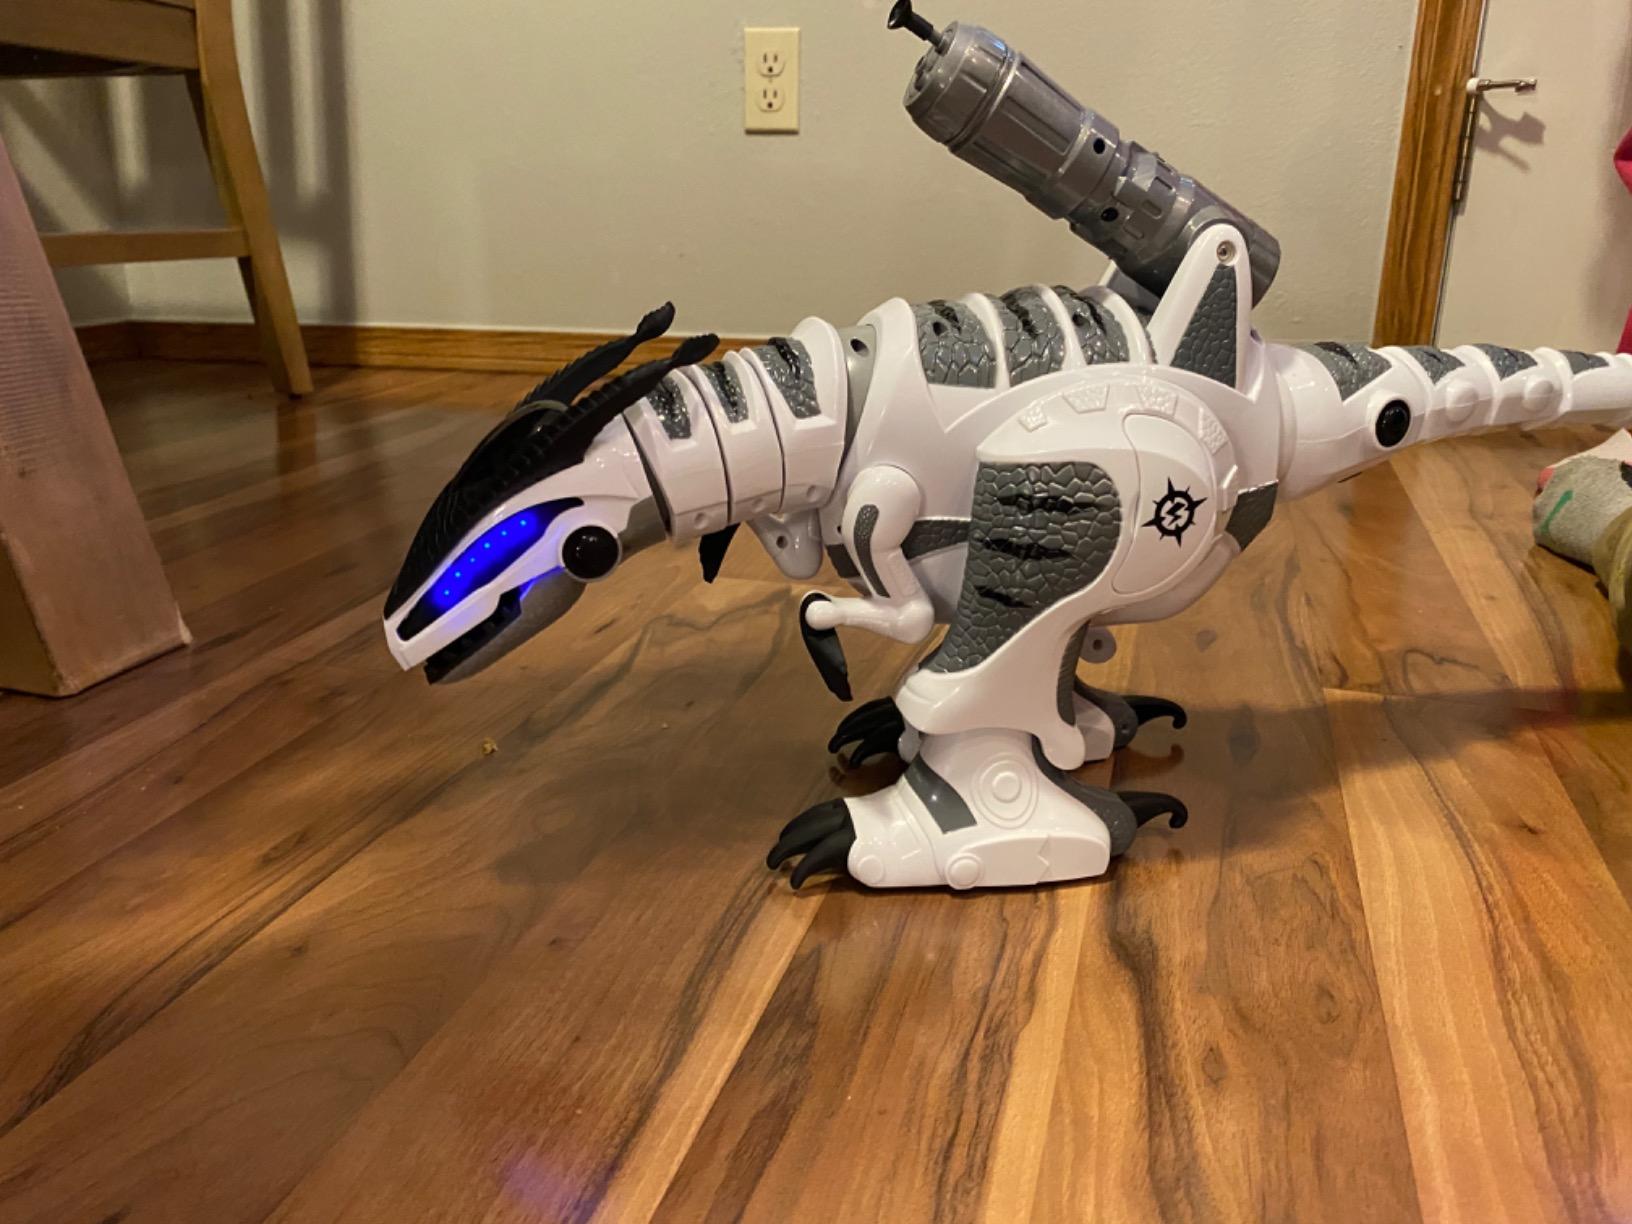 Intellisaur Remote Control Dinosaur Toy Robot For Kids - Interactive Electronic Pet Rc Robot Toy photo review